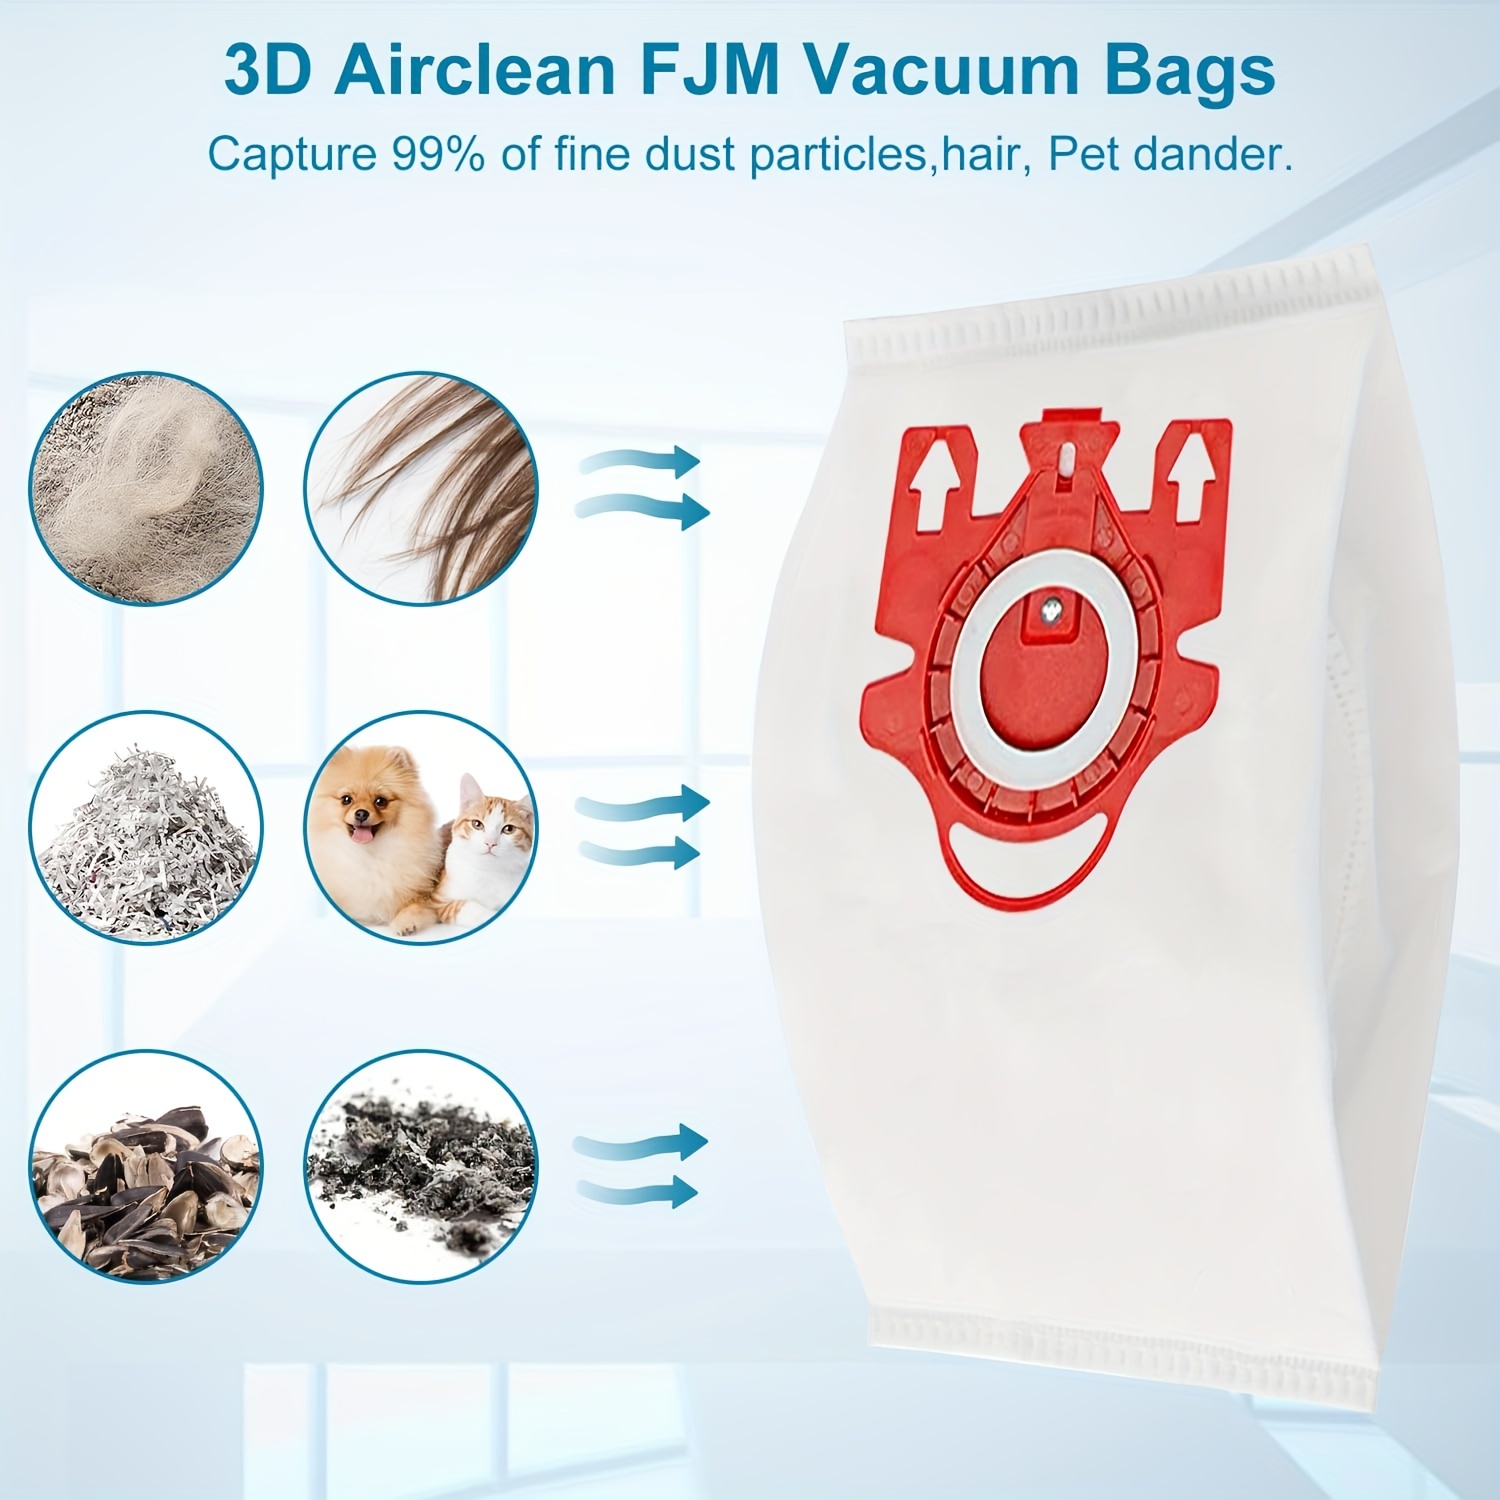 10 PCS Replacement Compatible AirClean 3D Efficiency Dust Bag for Miele  FJM,CompactC2,S241-256i,S290,S300i,S578,S700,S4,S6,Series Canister Vacuum